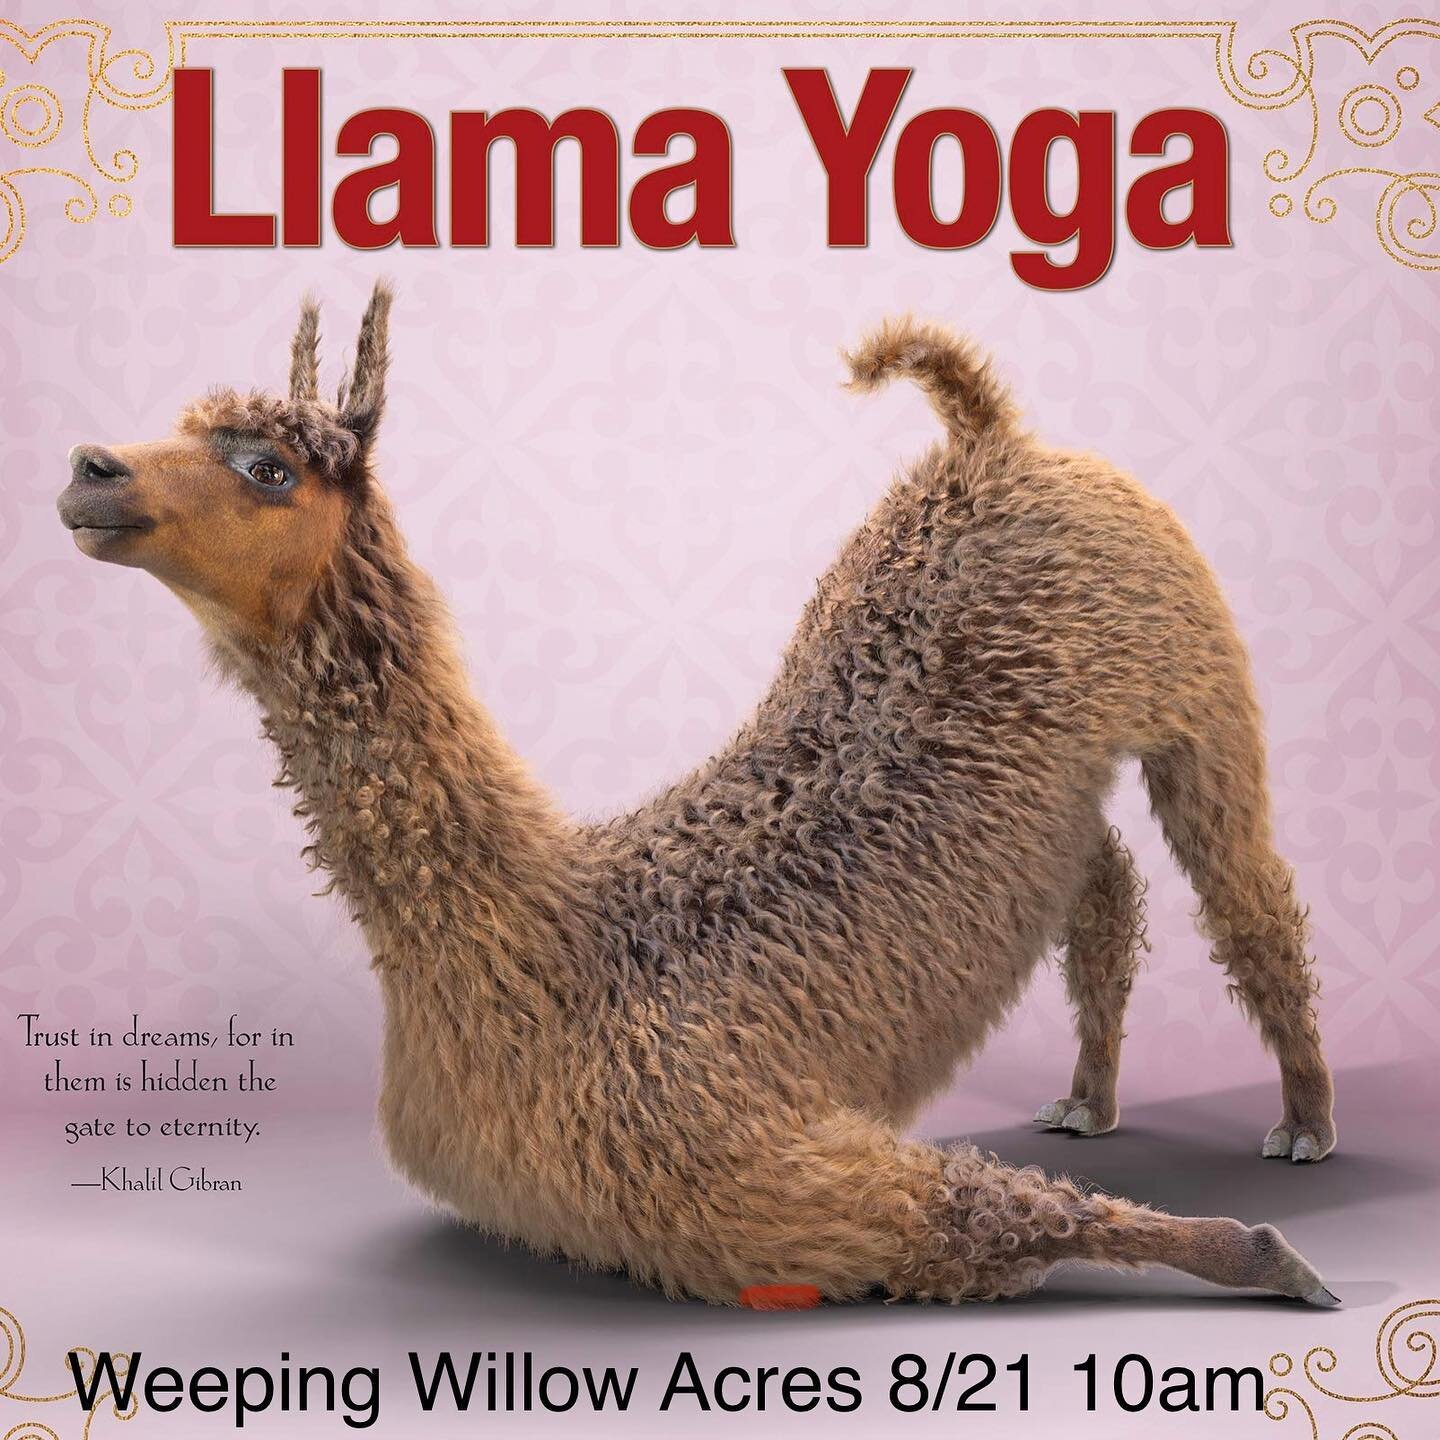 Yoga with the llamas! 8/21 at 10am. $50/car, invite as many friends as you can fit in. Lemonade and time with the animals after! Space is limited, contact the farm to schedule. 

This is an all-levels Vinyasa Yoga flow, 50 minute class led by yoga te